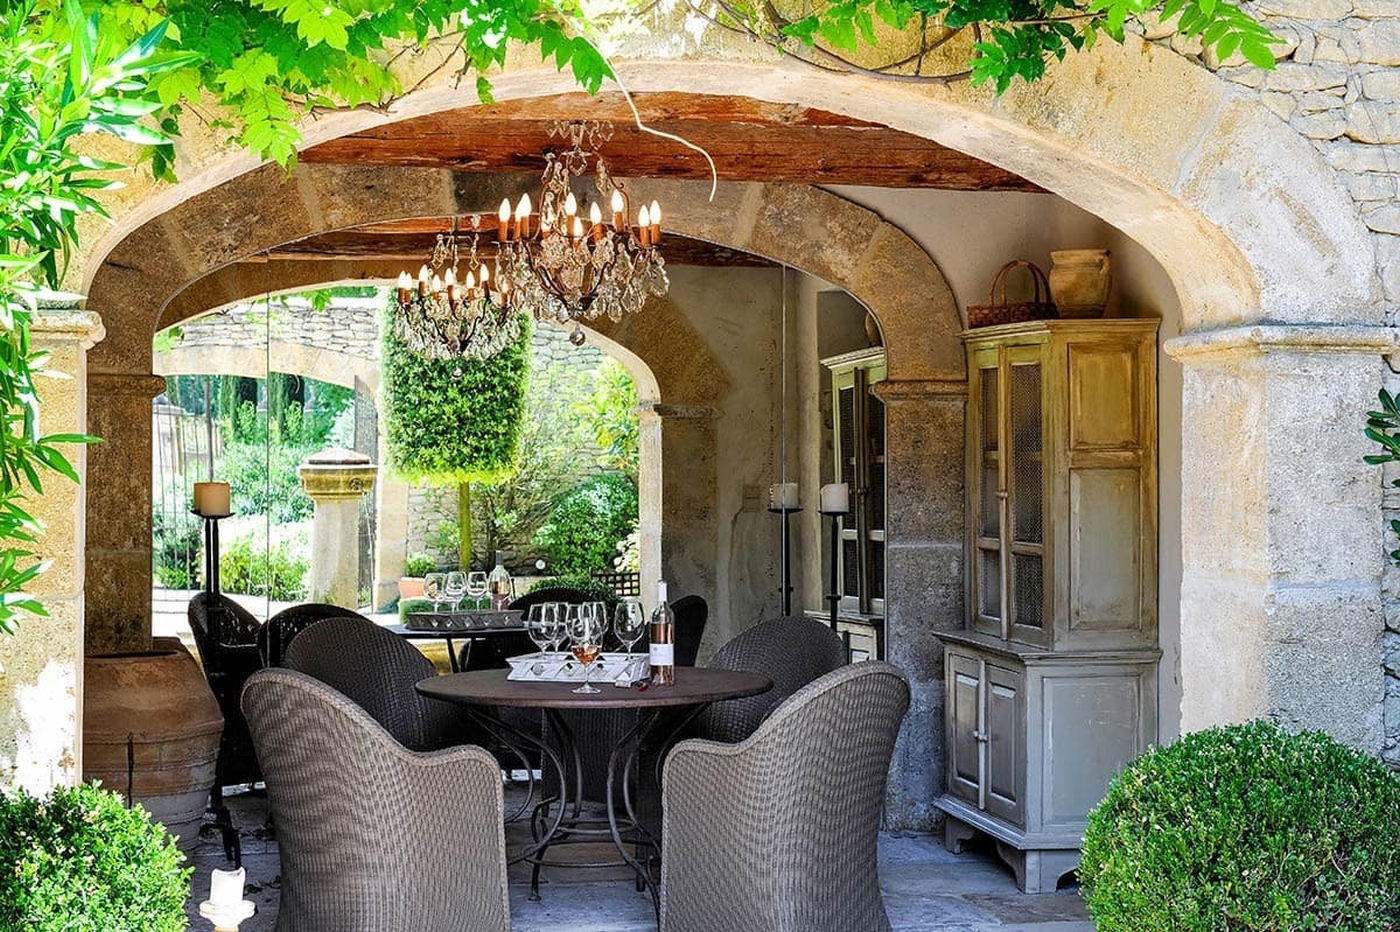 Outdoor seating with chairs and chandelier Bastide sur la Sorgue in Provence